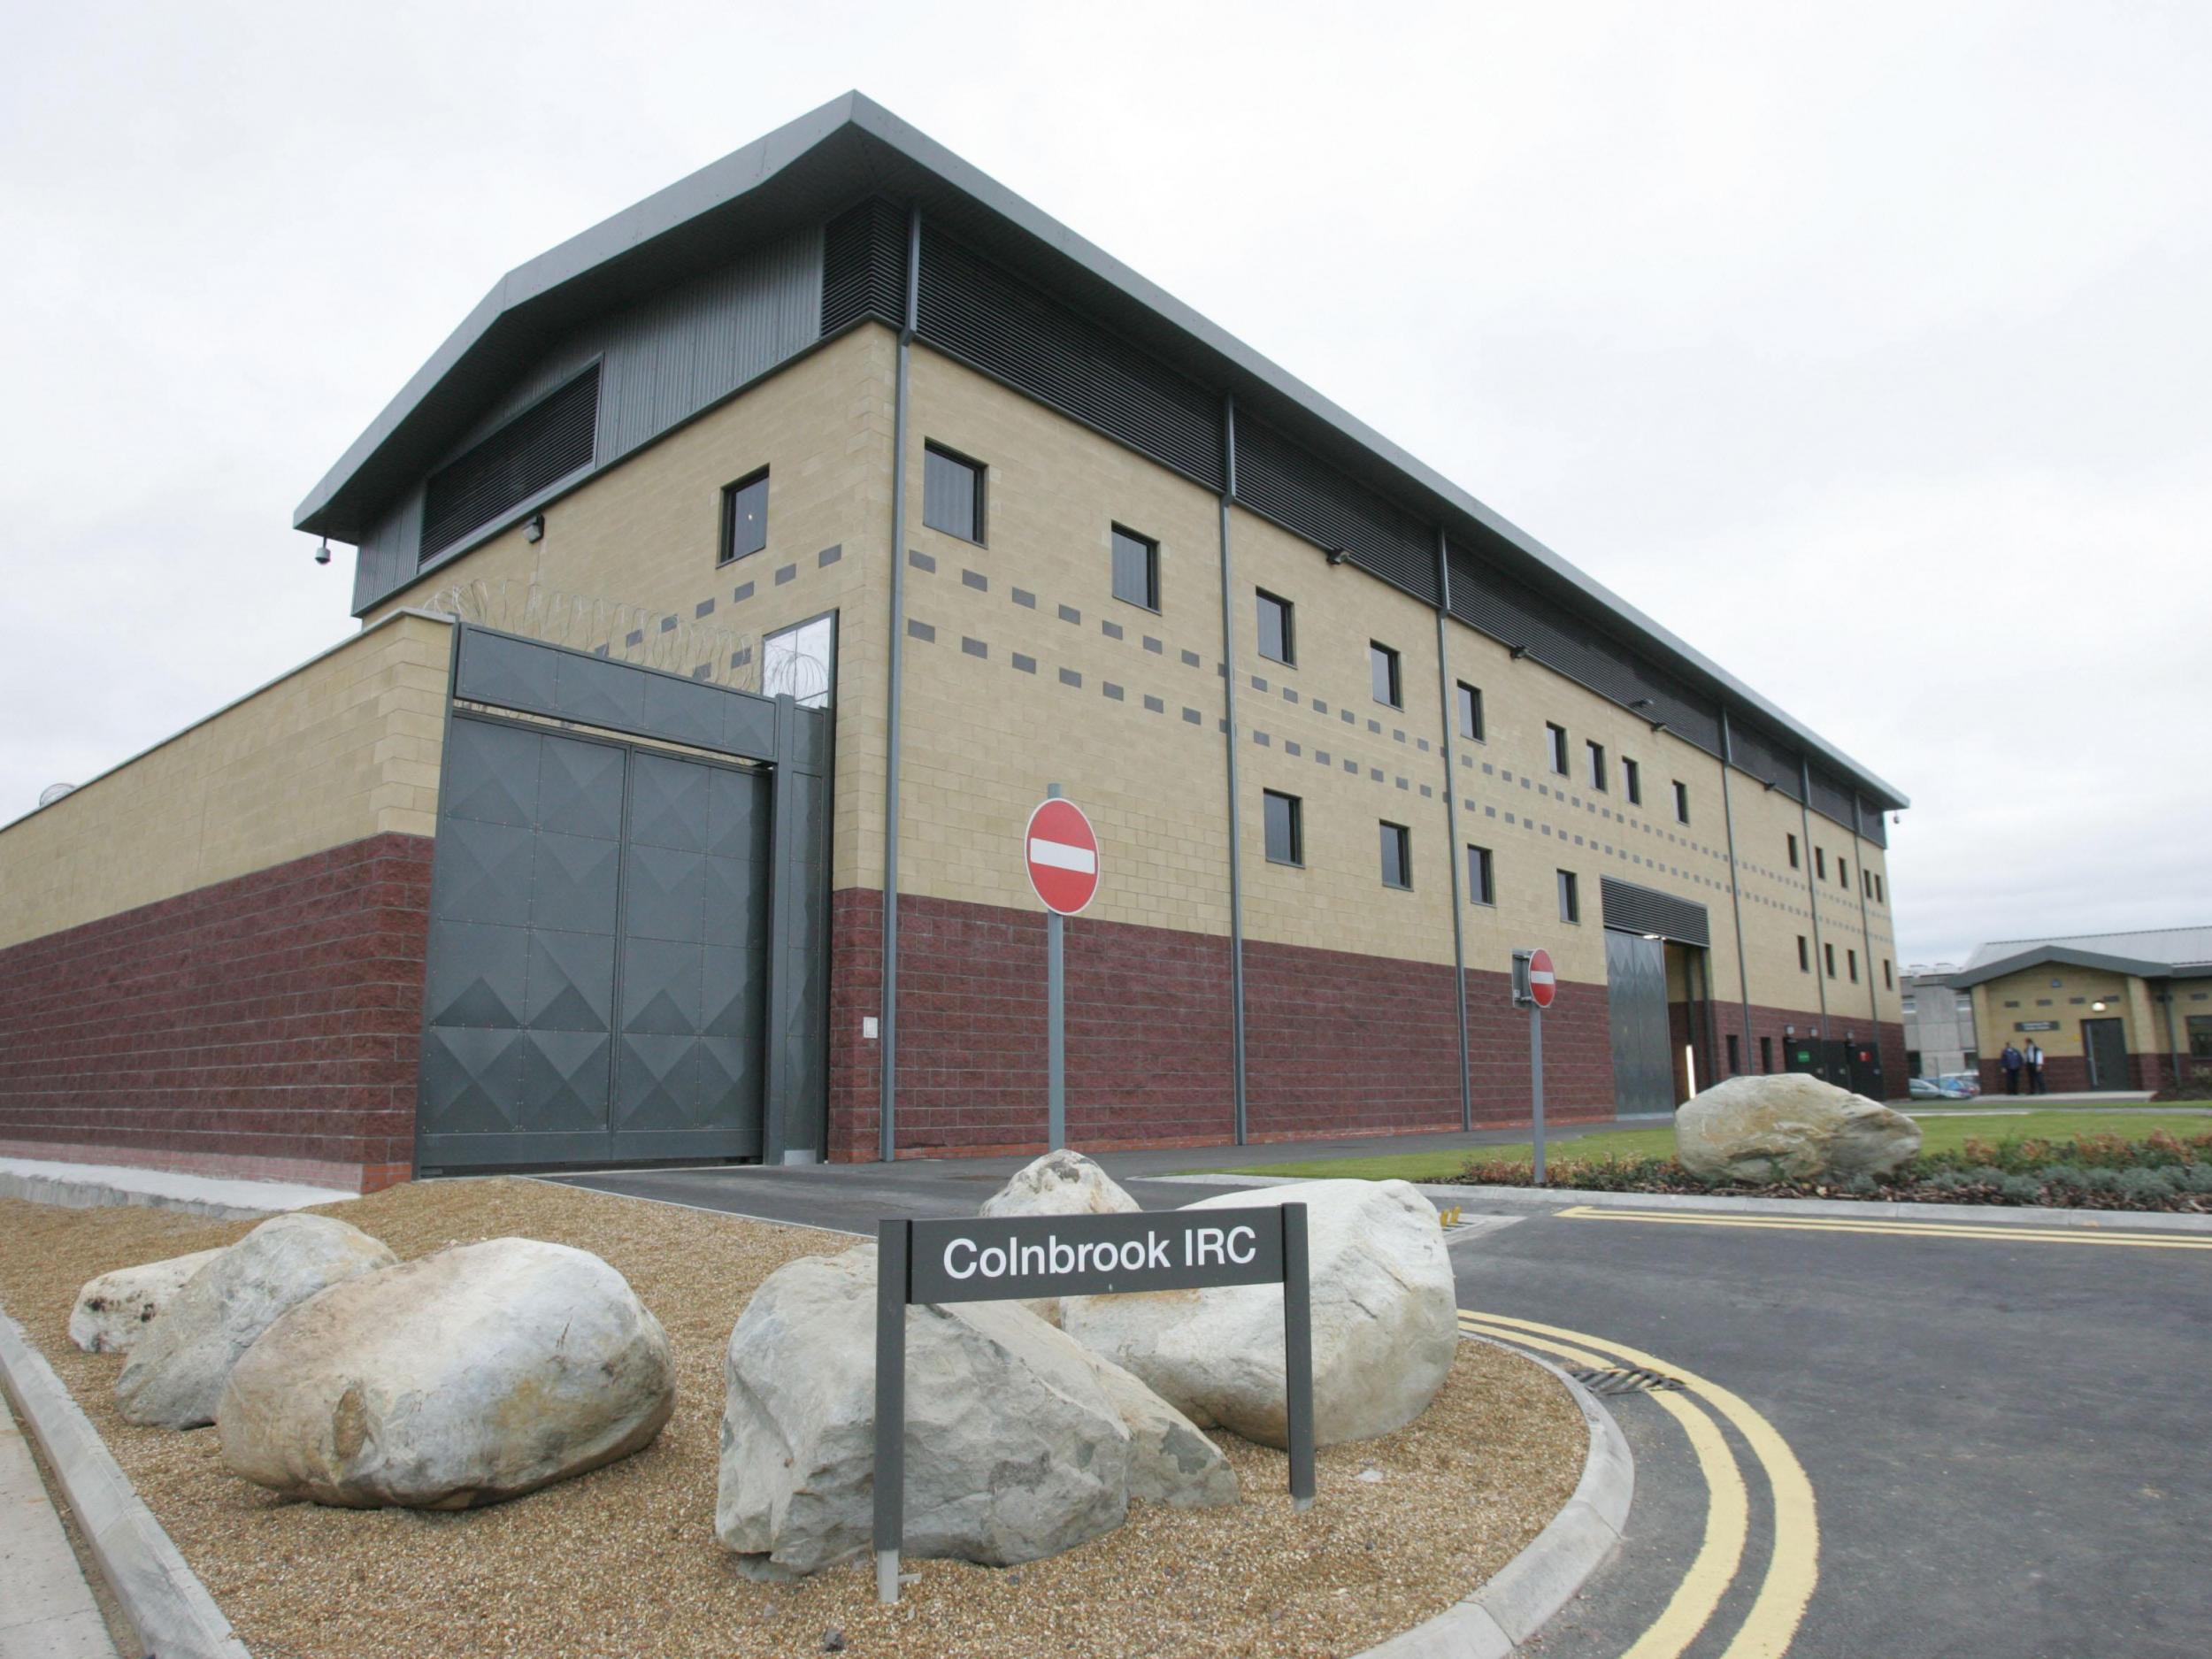 The man was held at Colnbrook Immigration Removal Centre, before he was deported.